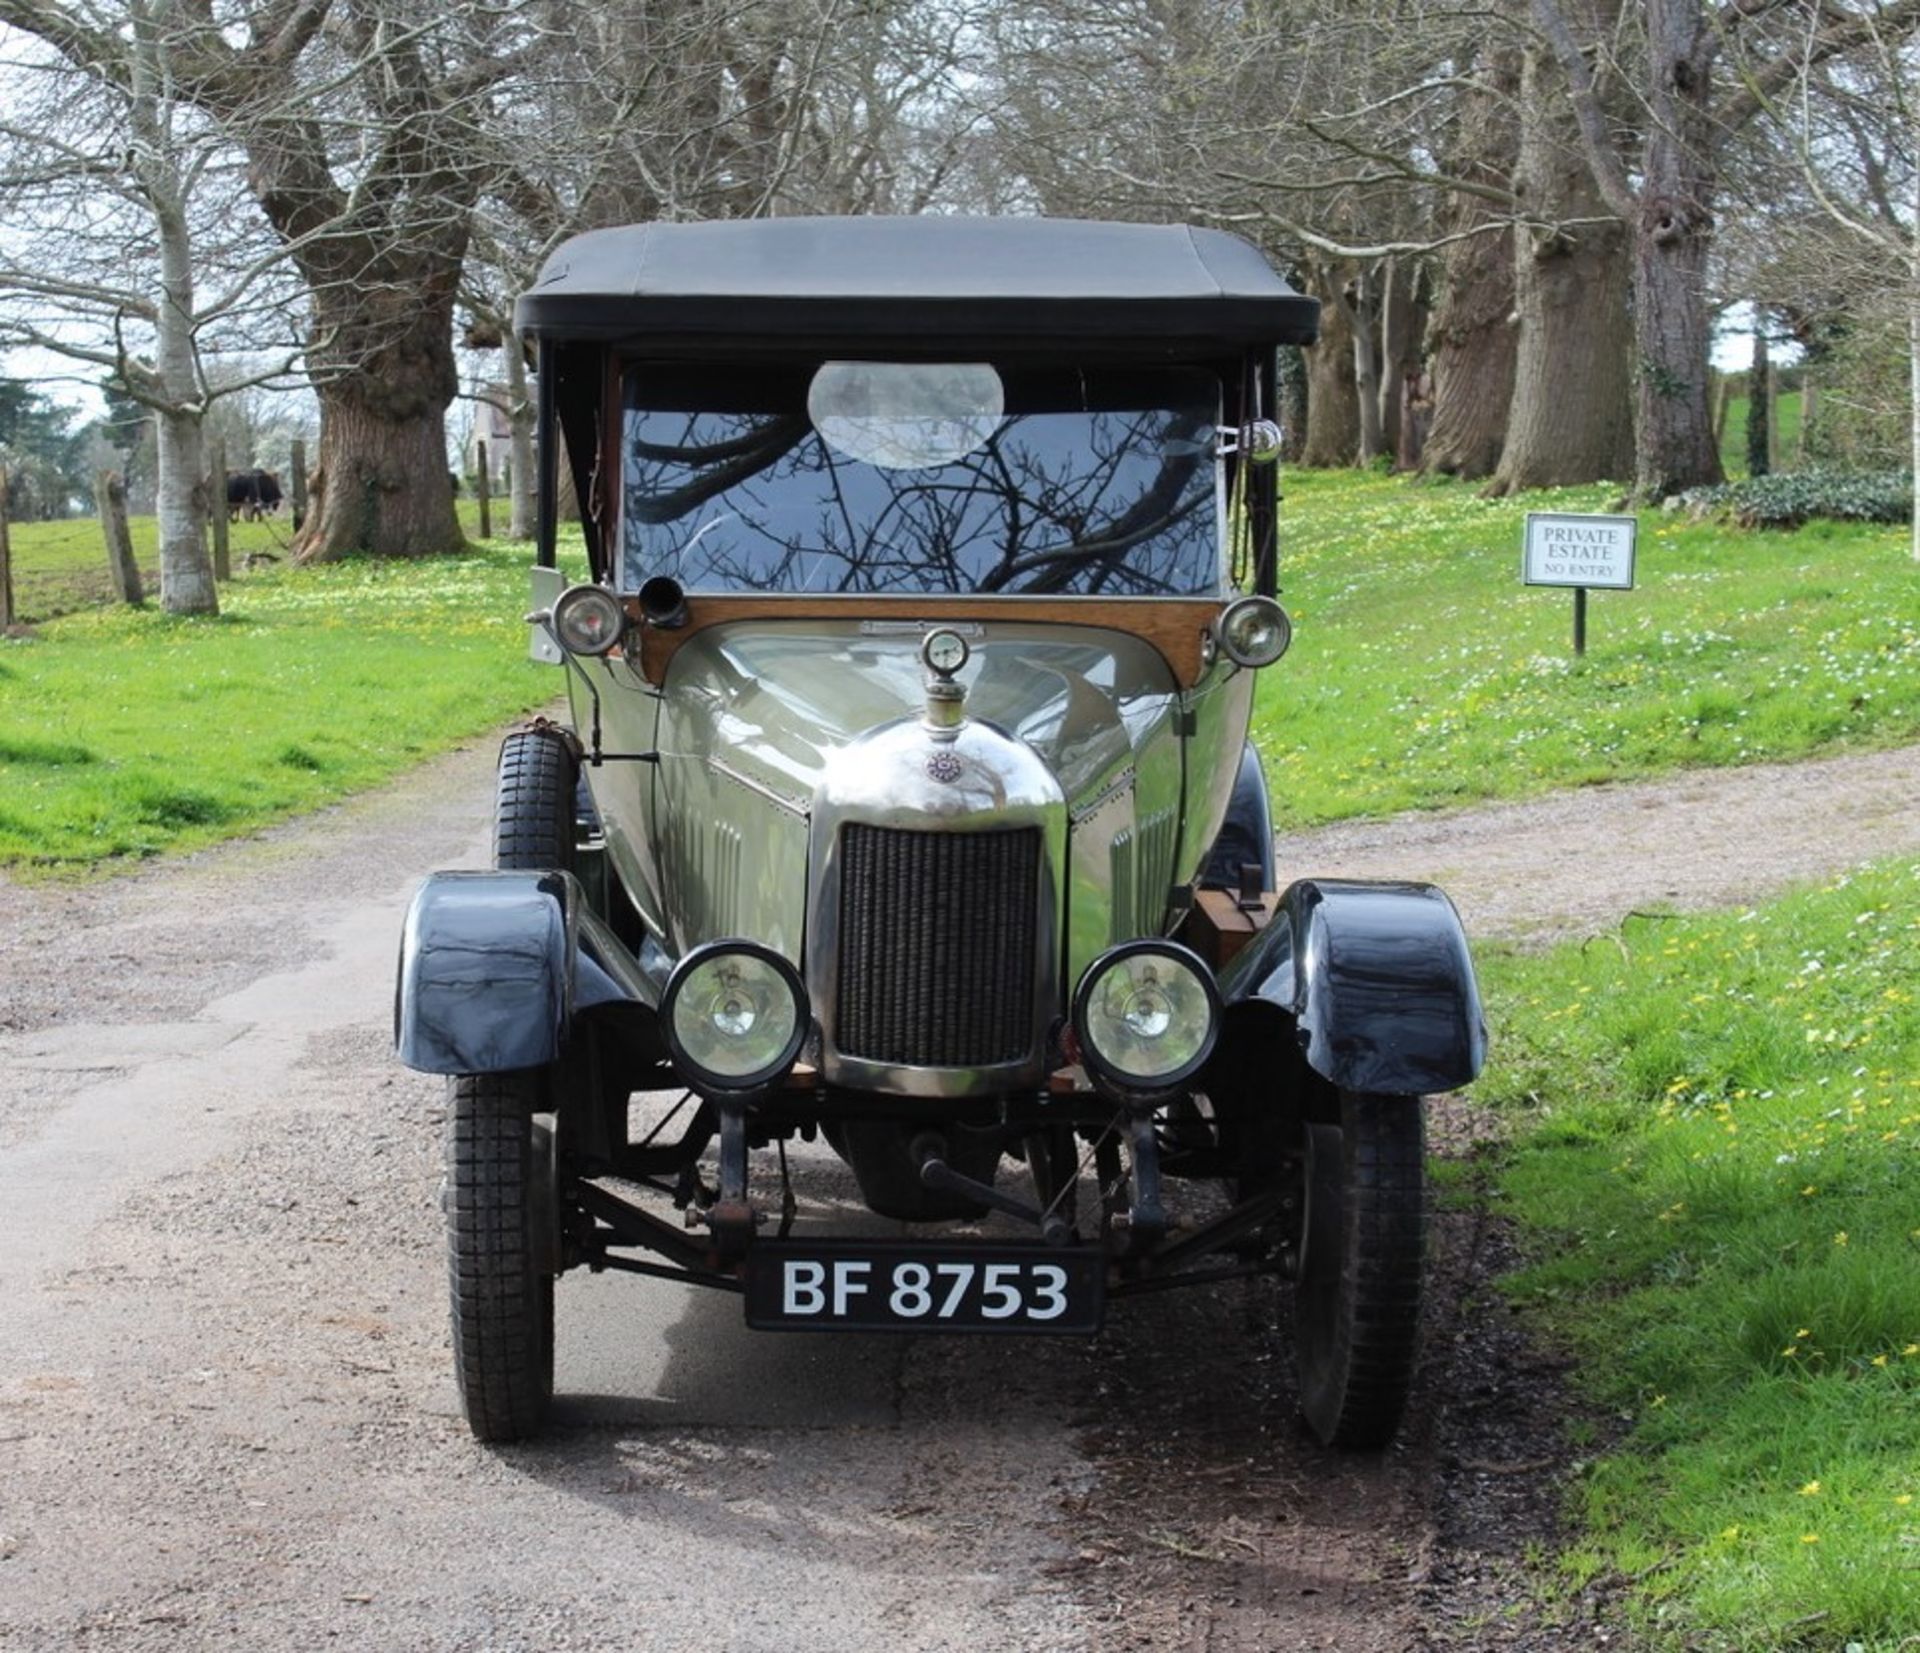 1921 MORRIS OXFORD ‘BULLNOSE’ DOCTOR'S COUPE Registration Number: BF 8753 Chassis Number: TBA - Image 5 of 19